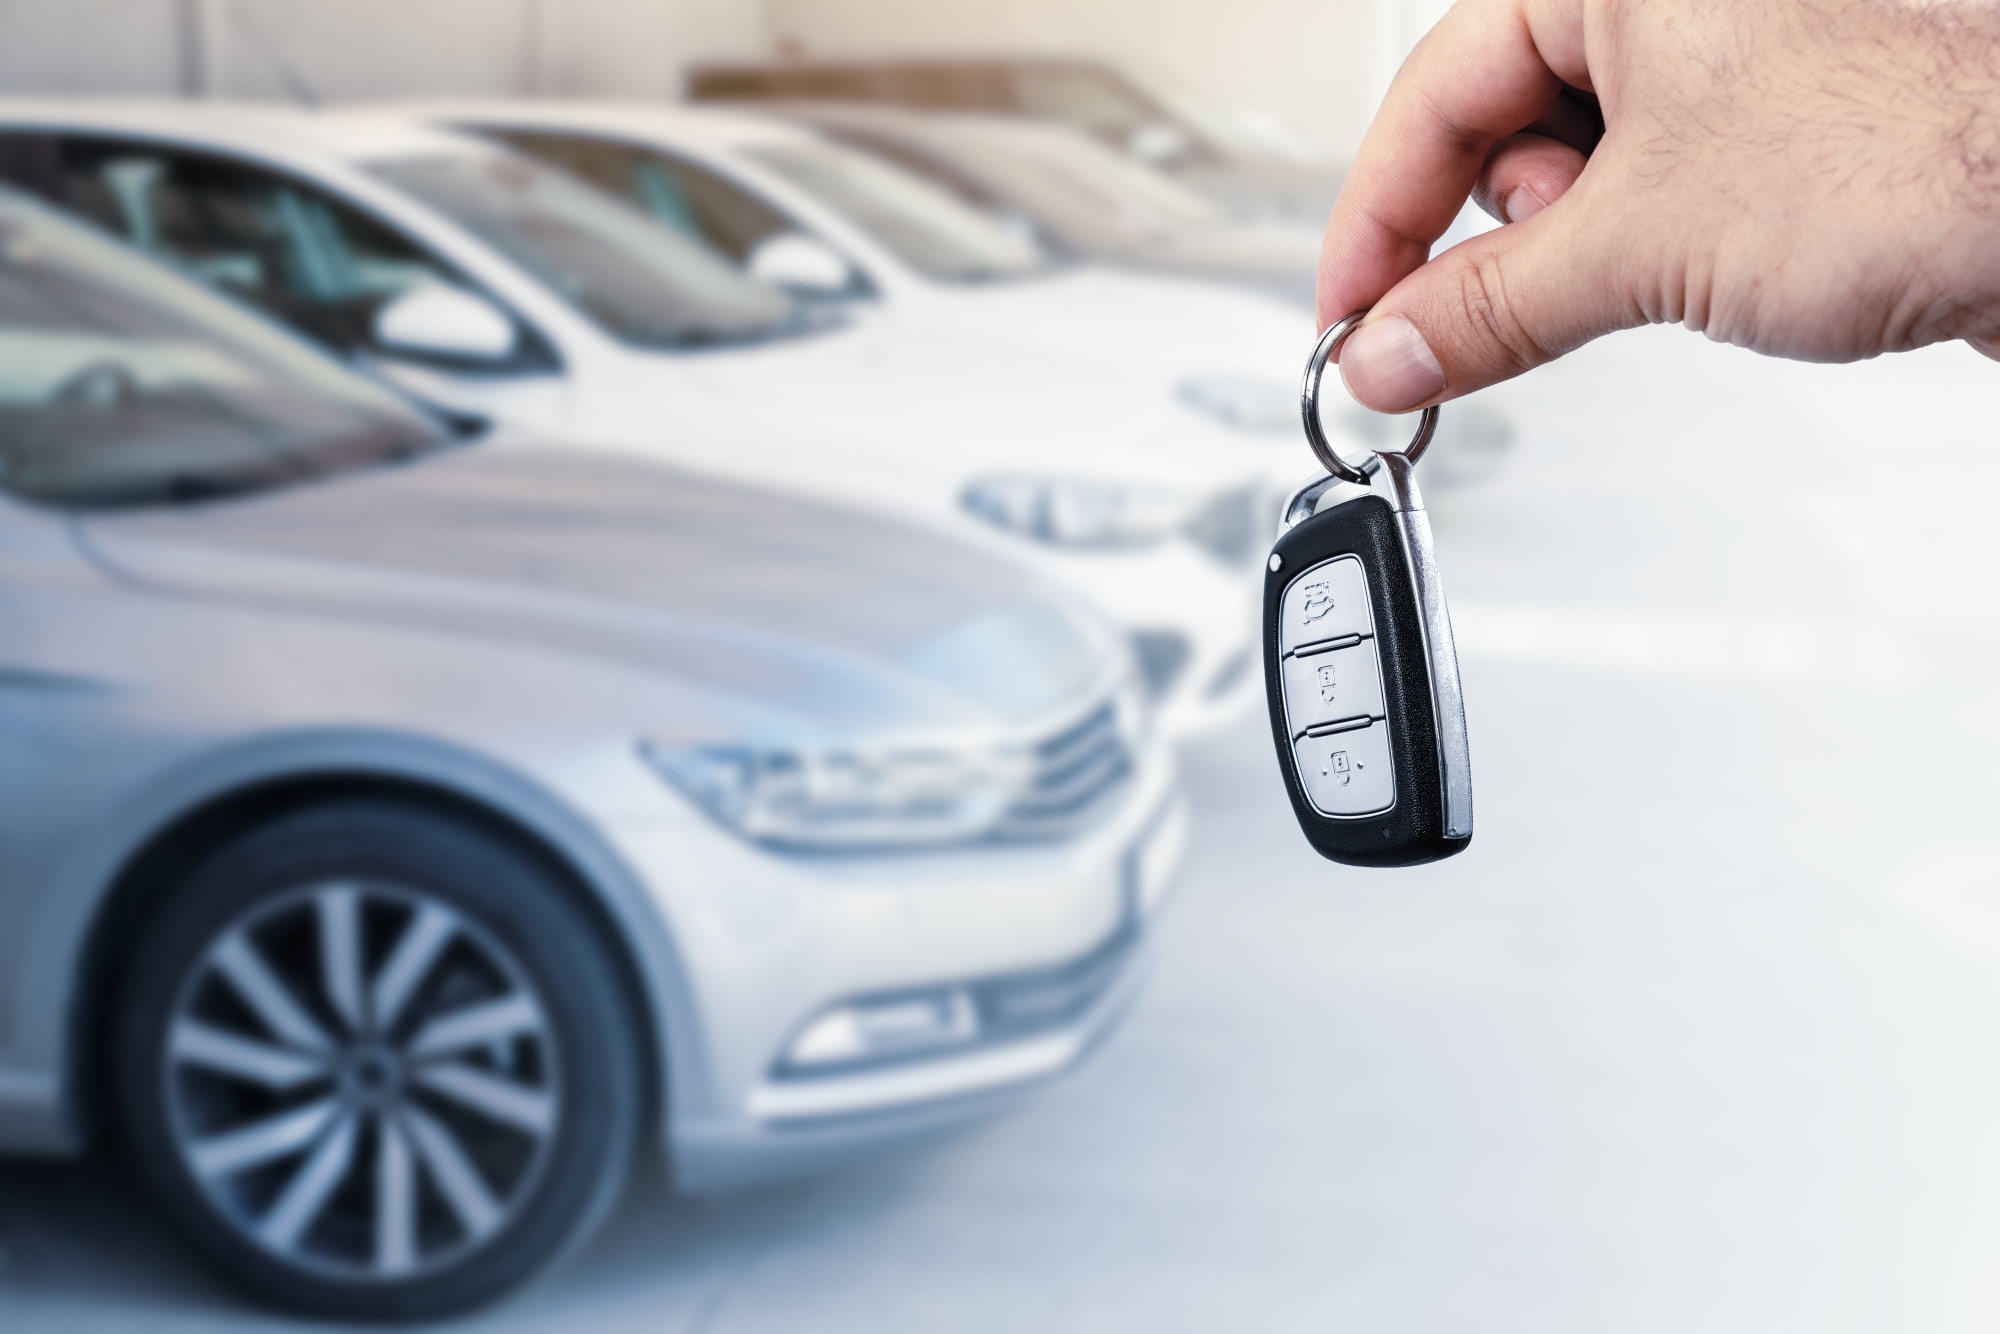 Leasing vs Financing a Vehicle: Which Is Better for You?